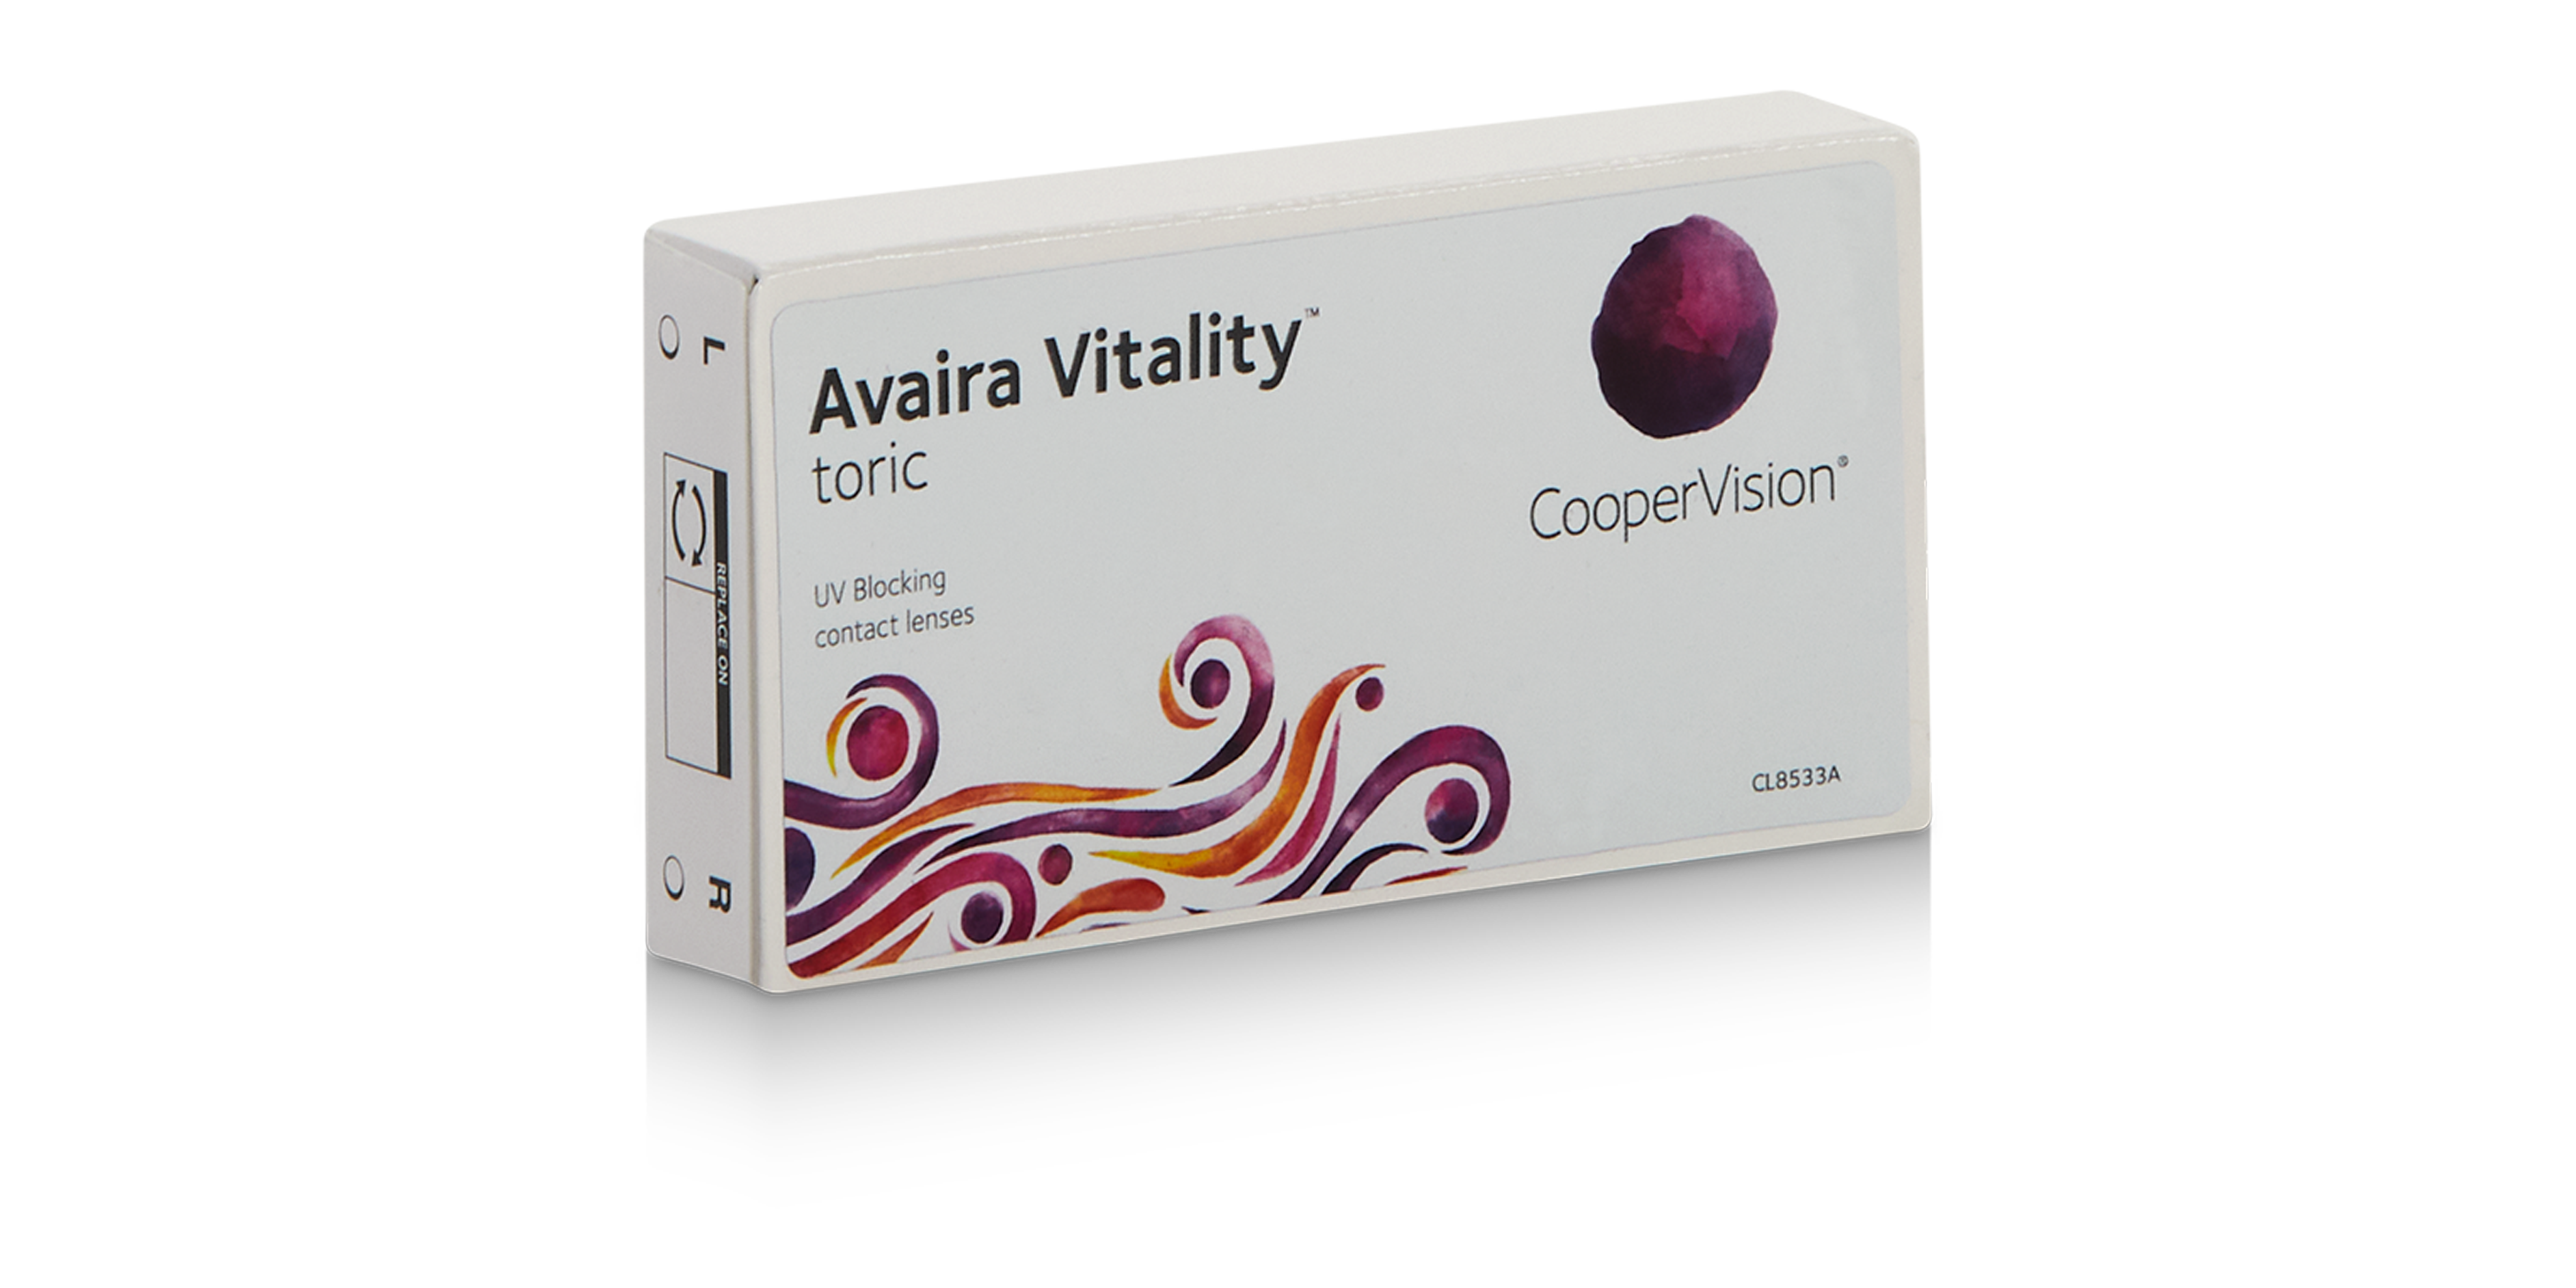 avaira-vitality-toric-6-contact-lenses-lenscrafters